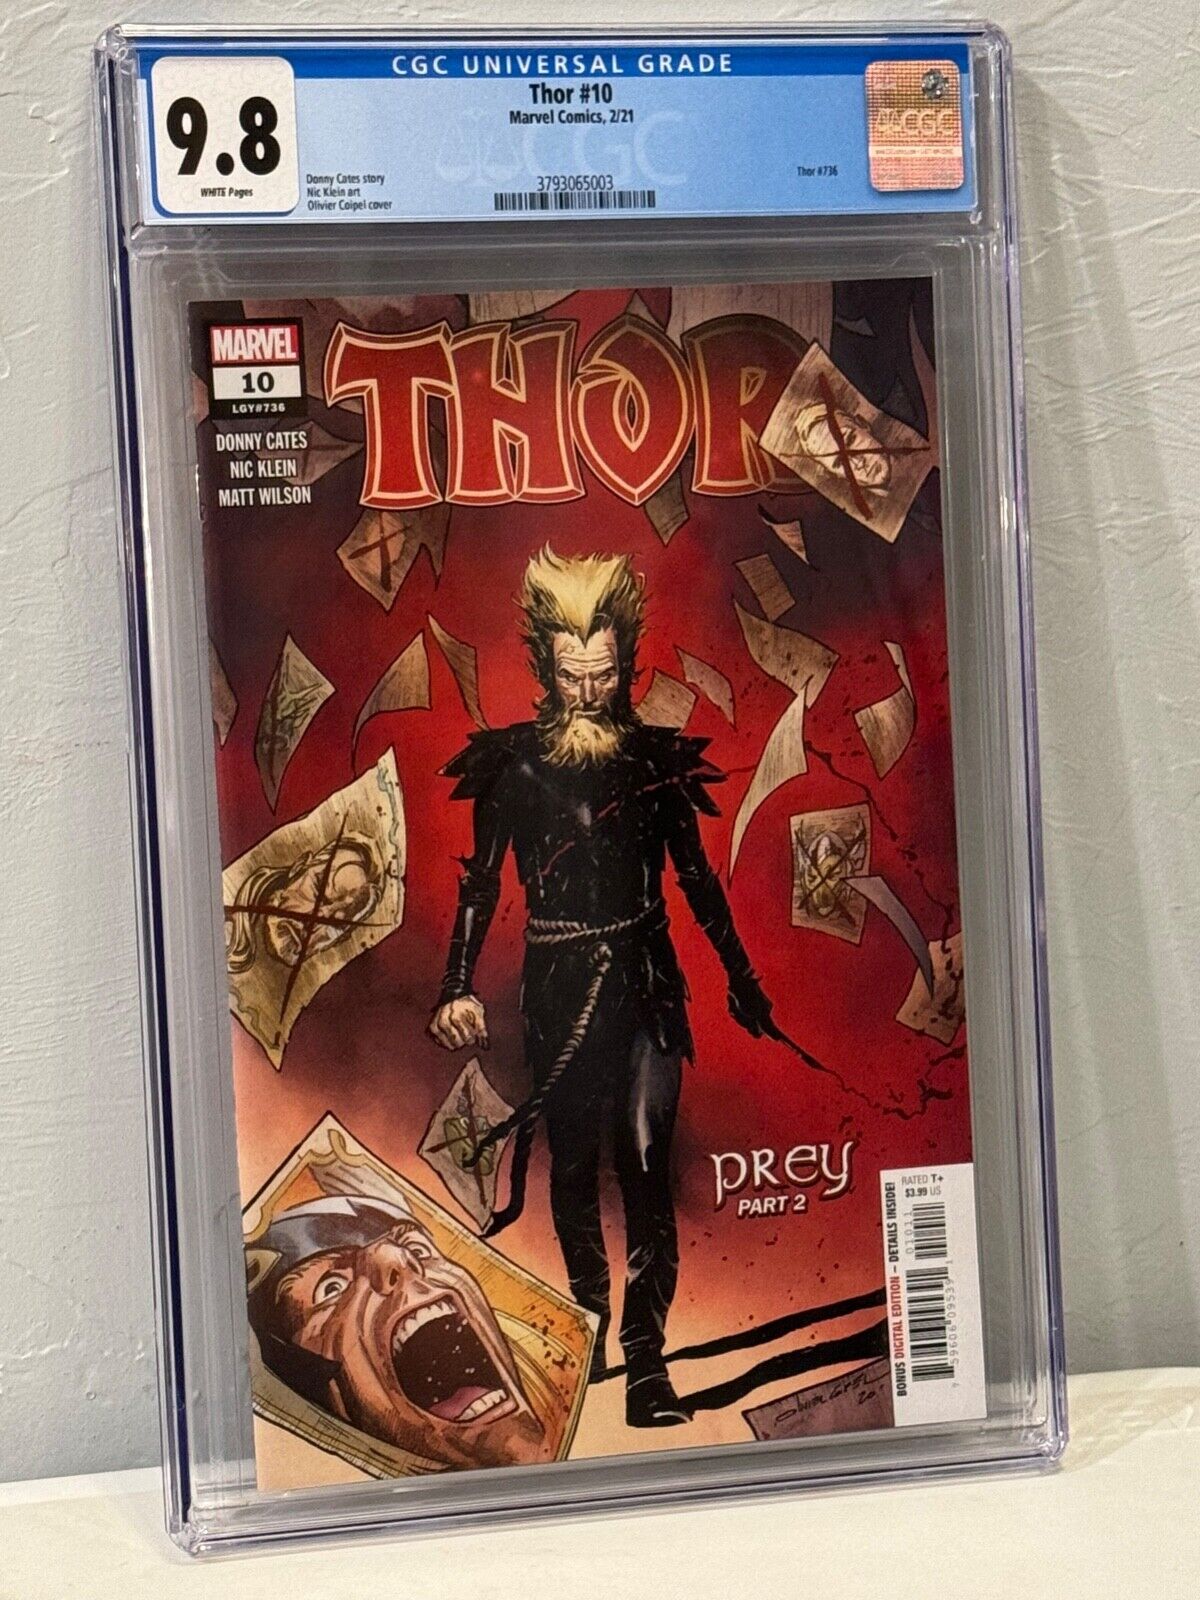 THOR #10 (February 2021) CGC 9.8 WHITE PAGES LGY #736 